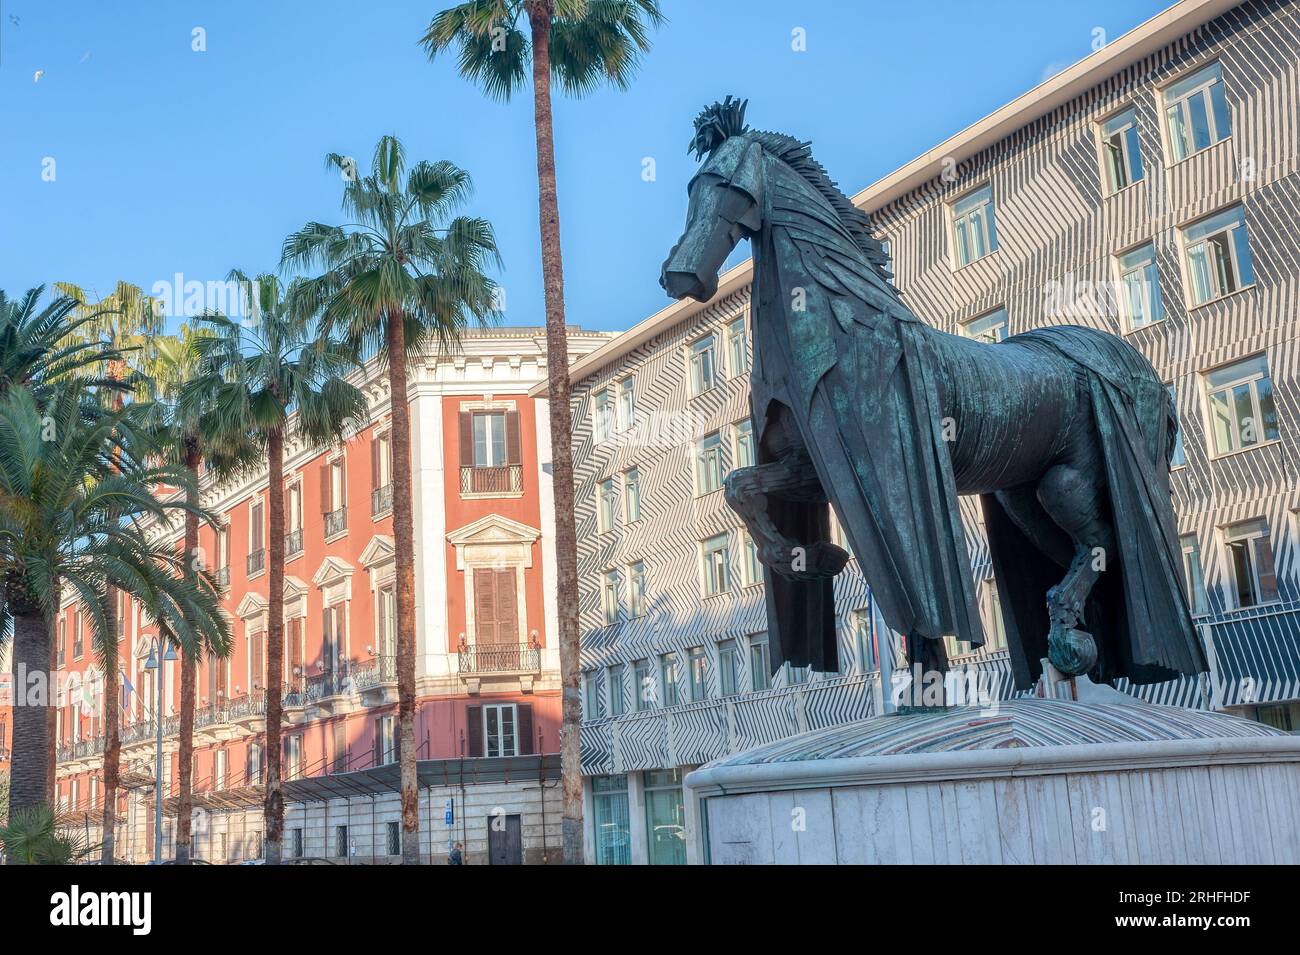 Realized by the artist Mario Ceroli in 1985, the statue was owned by municipality and placed in Corso Vittorio Emanuele Stock Photo